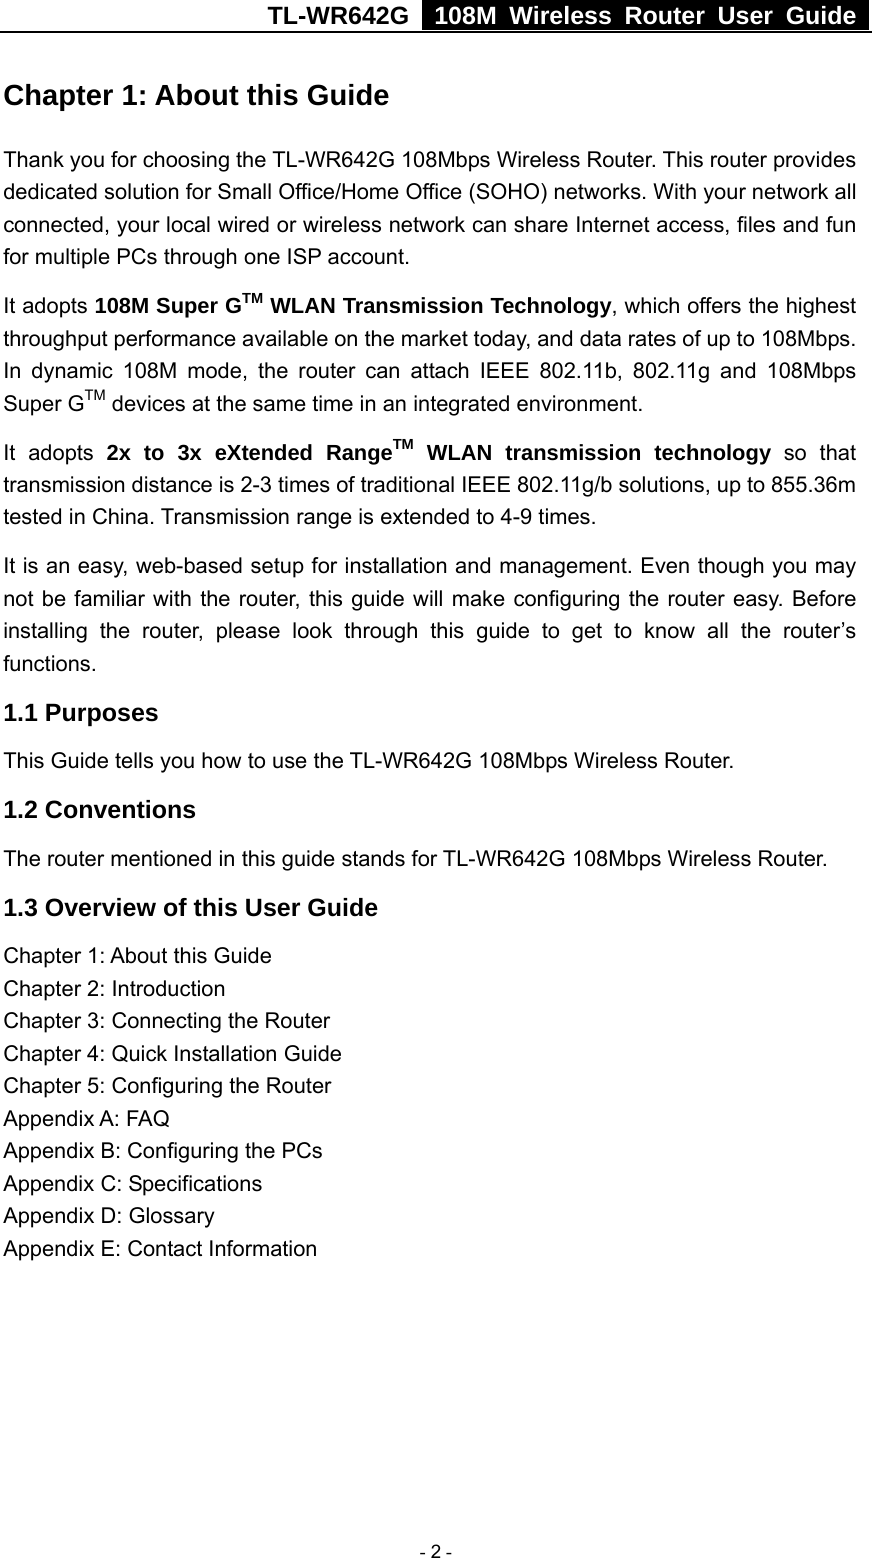 TL-WR642G   108M Wireless Router User Guide   - 2 - Chapter 1: About this Guide Thank you for choosing the TL-WR642G 108Mbps Wireless Router. This router provides dedicated solution for Small Office/Home Office (SOHO) networks. With your network all connected, your local wired or wireless network can share Internet access, files and fun for multiple PCs through one ISP account.     It adopts 108M Super GTM WLAN Transmission Technology, which offers the highest throughput performance available on the market today, and data rates of up to 108Mbps. In dynamic 108M mode, the router can attach IEEE 802.11b, 802.11g and 108Mbps Super GTM devices at the same time in an integrated environment. It adopts 2x to 3x eXtended RangeTM WLAN transmission technology so that transmission distance is 2-3 times of traditional IEEE 802.11g/b solutions, up to 855.36m tested in China. Transmission range is extended to 4-9 times. It is an easy, web-based setup for installation and management. Even though you may not be familiar with the router, this guide will make configuring the router easy. Before installing the router, please look through this guide to get to know all the router’s functions. 1.1 Purposes This Guide tells you how to use the TL-WR642G 108Mbps Wireless Router.   1.2 Conventions The router mentioned in this guide stands for TL-WR642G 108Mbps Wireless Router. 1.3 Overview of this User Guide Chapter 1: About this Guide Chapter 2: Introduction Chapter 3: Connecting the Router Chapter 4: Quick Installation Guide Chapter 5: Configuring the Router Appendix A: FAQ Appendix B: Configuring the PCs Appendix C: Specifications Appendix D: Glossary Appendix E: Contact Information 